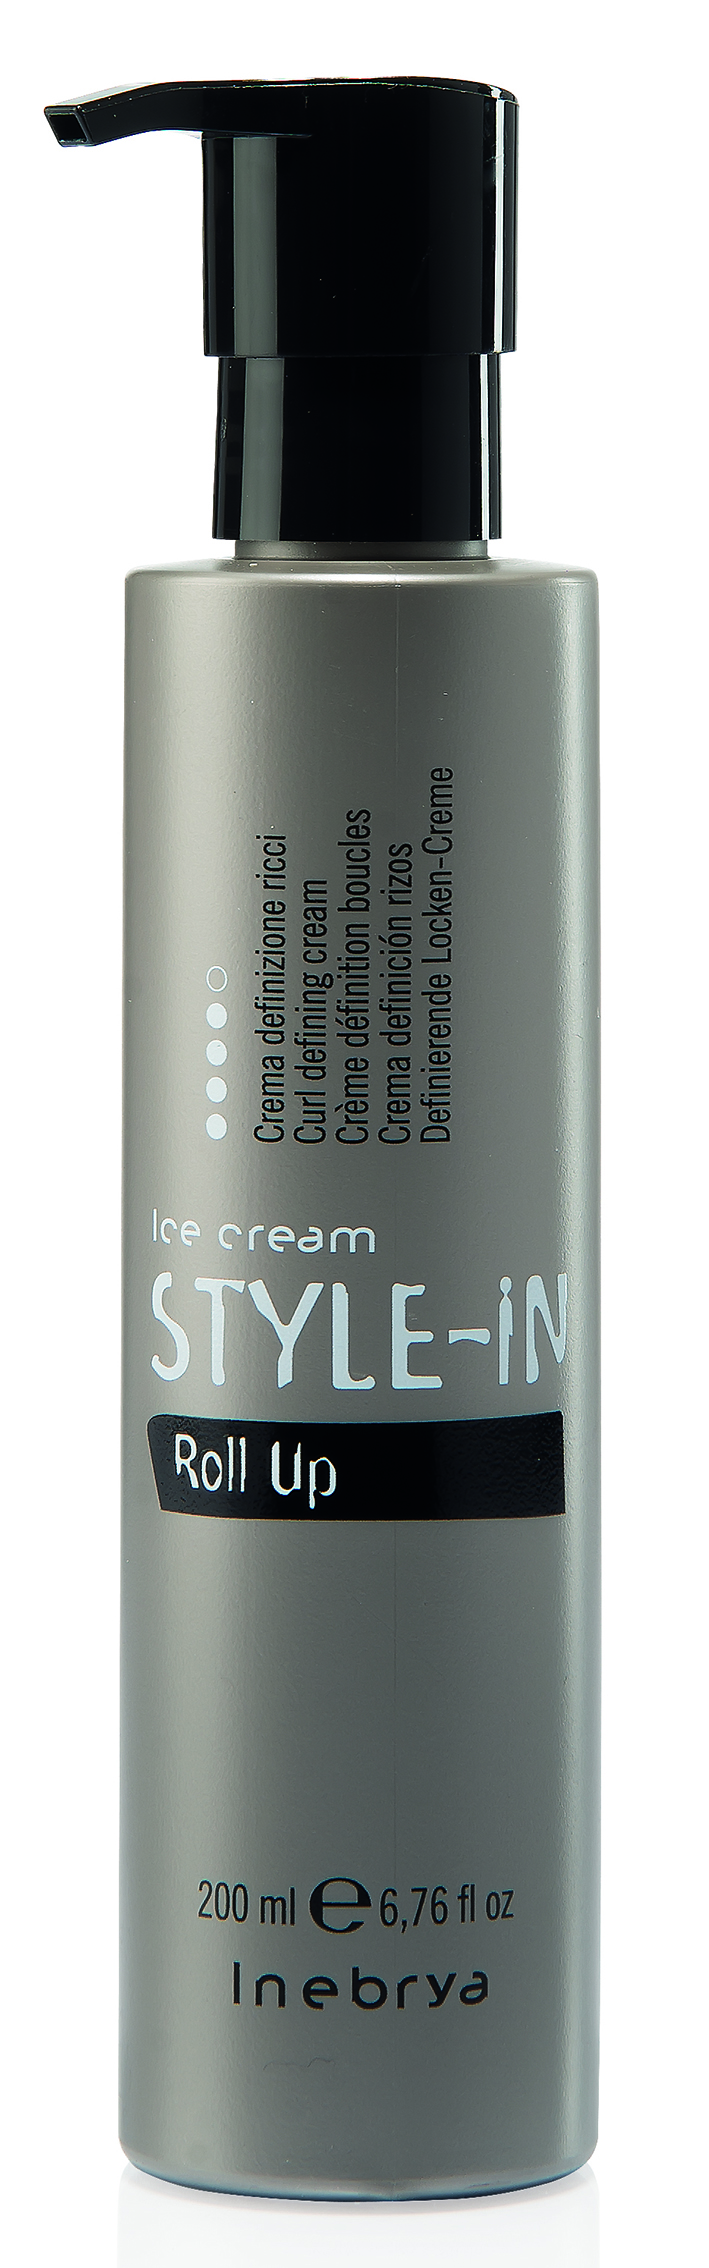 Style in Roll up Creme, 200ml